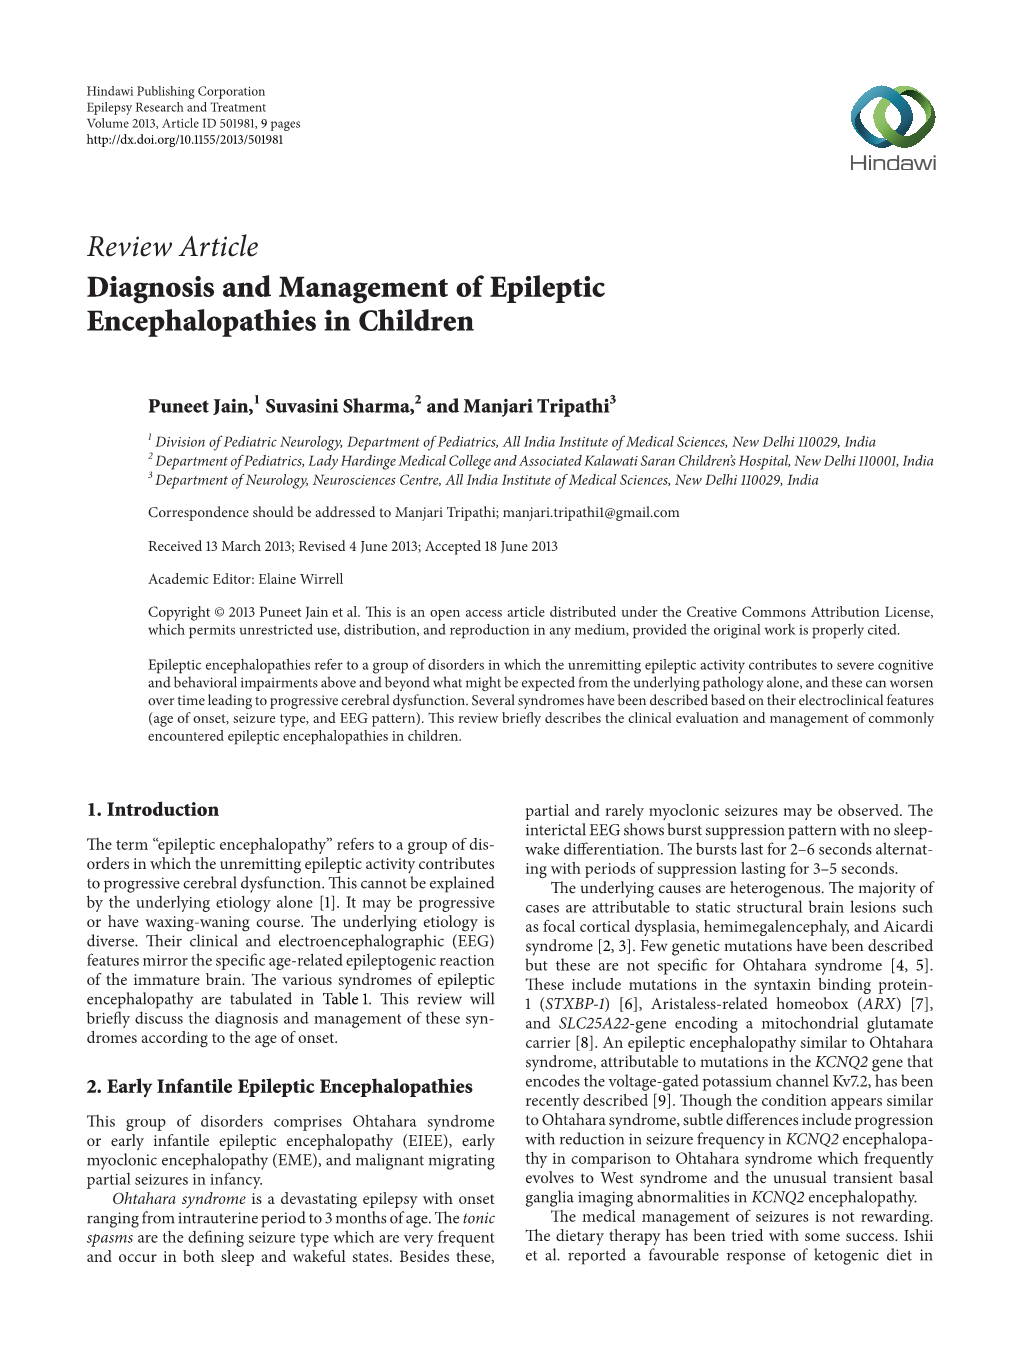 Review Article Diagnosis and Management of Epileptic Encephalopathies in Children